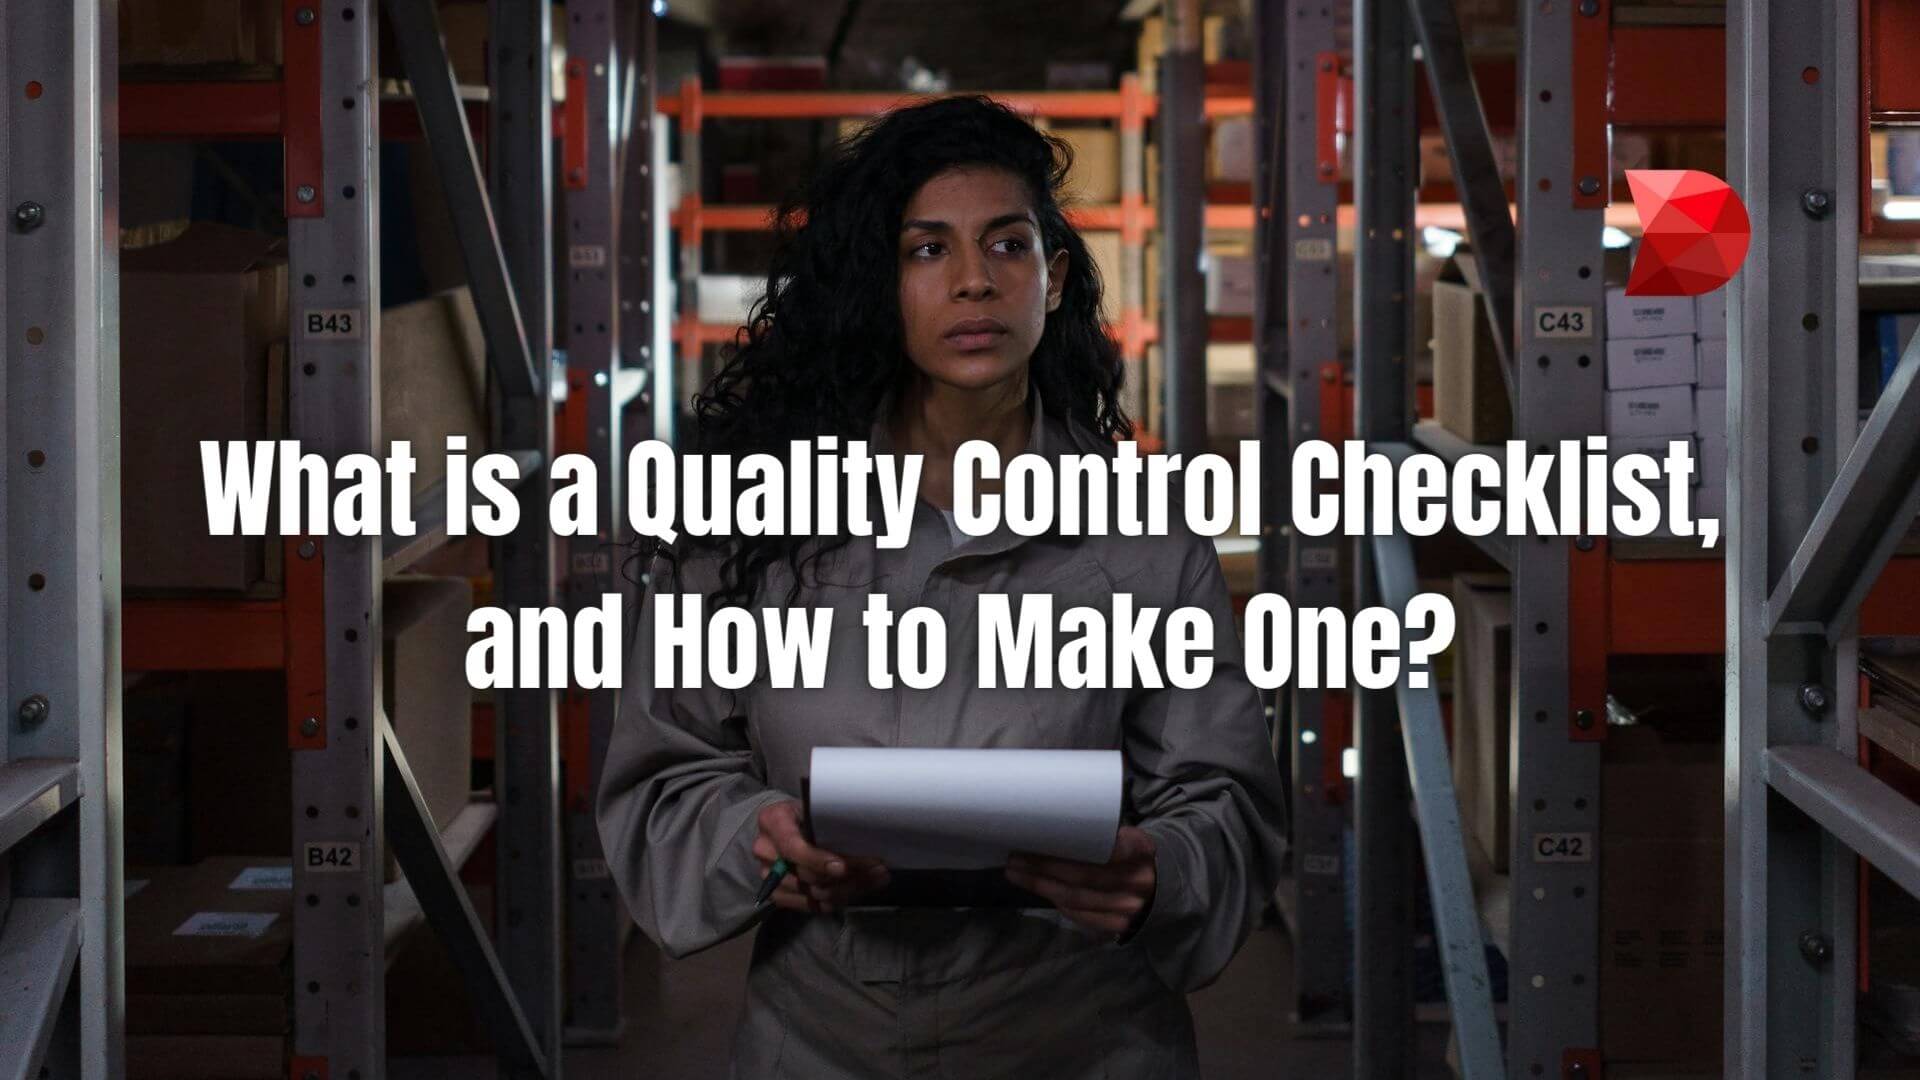 Discover the essentials of creating a robust Quality Control Checklist with our complete guide. Learn effective strategies and tips today!